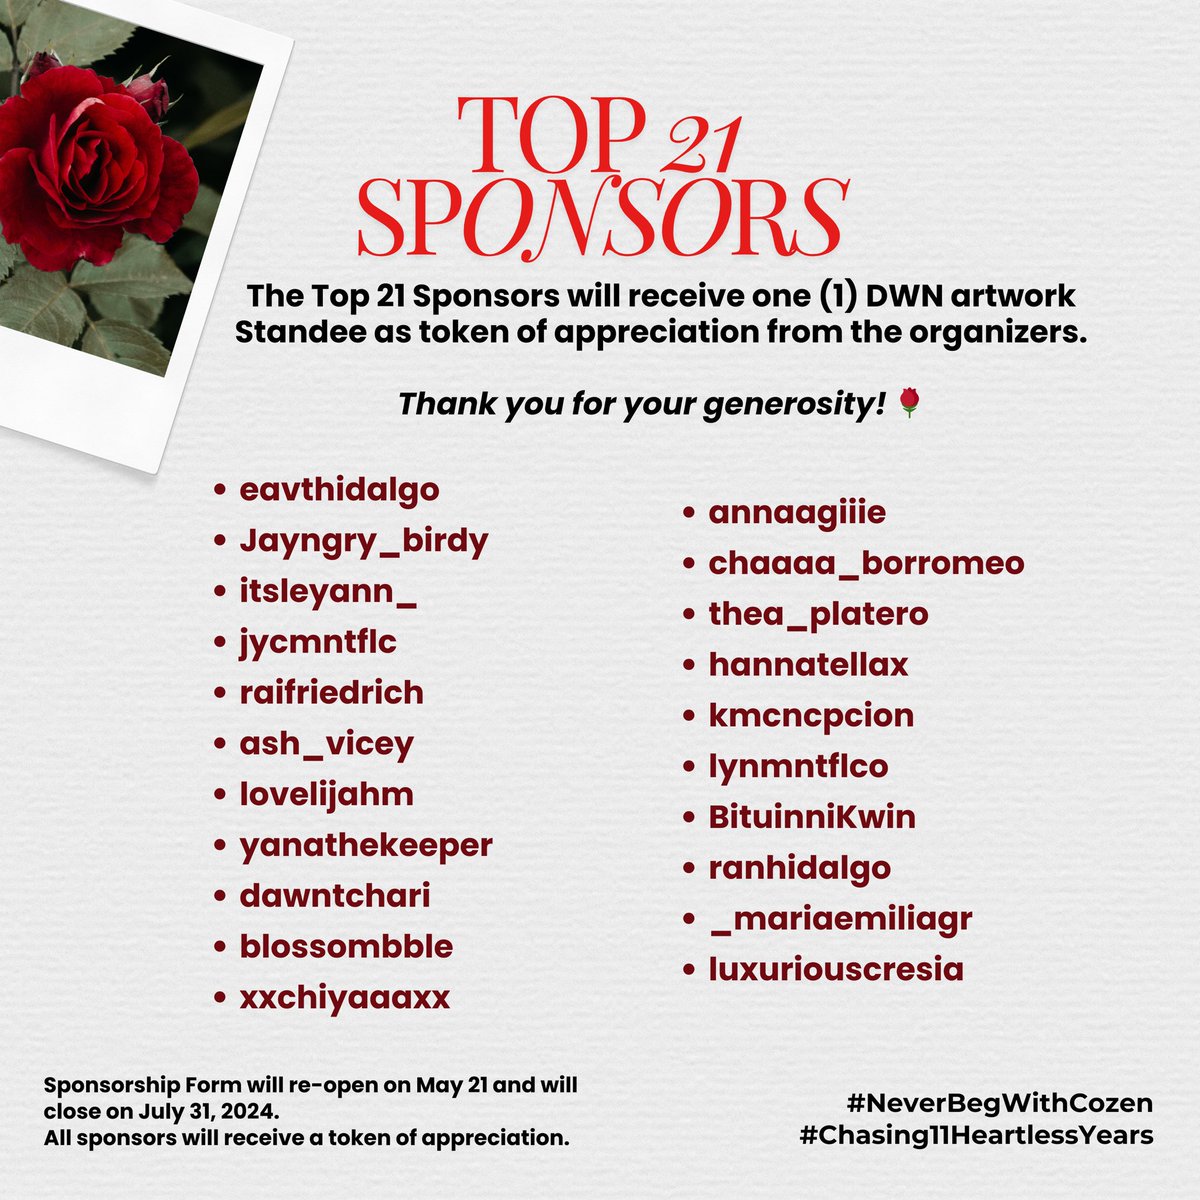 We just can’t resist you! Here’s our Top 21  Cozen Sponsors that will bring home 1 DWN artwork standee! 🌹

Kindly give us 1-2 days to send out e-mail confirmations. Thank you for your generosity, Chasers! 

#NeverBegWithCozen
#Chasing11HeartlessYears